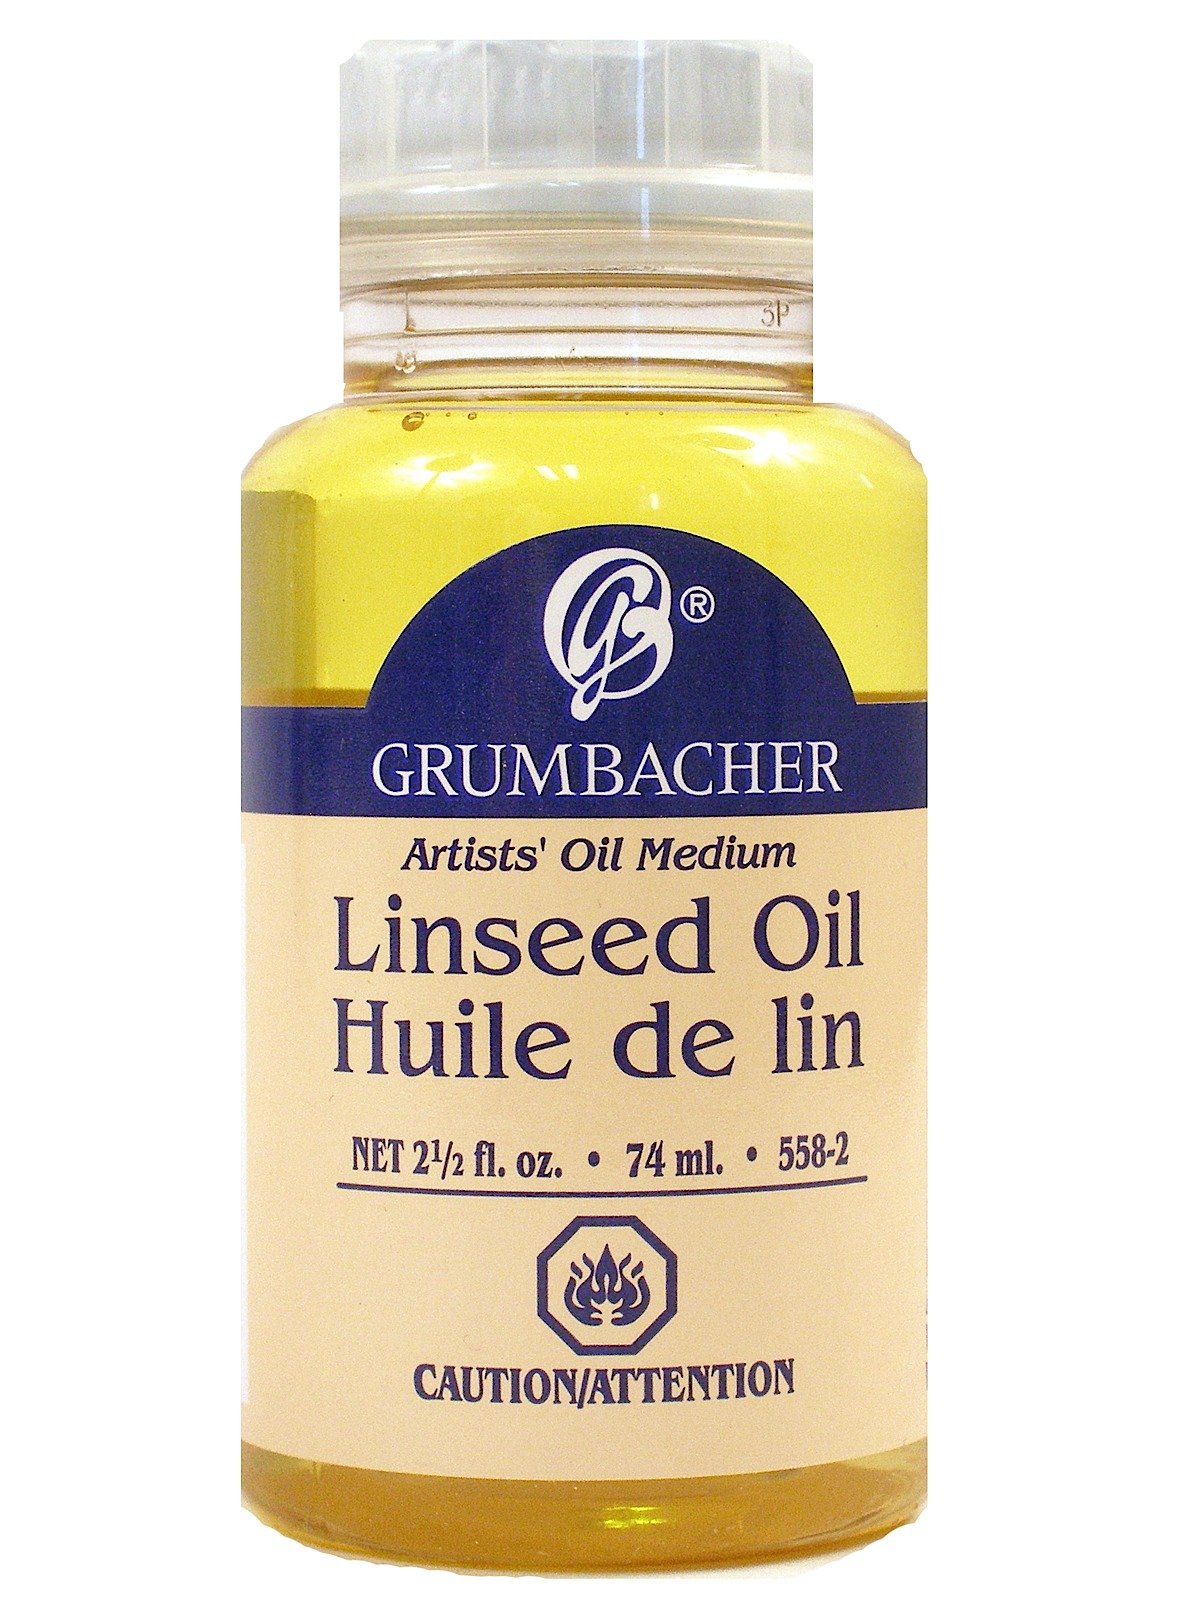 Grumbacher - Linseed Oil